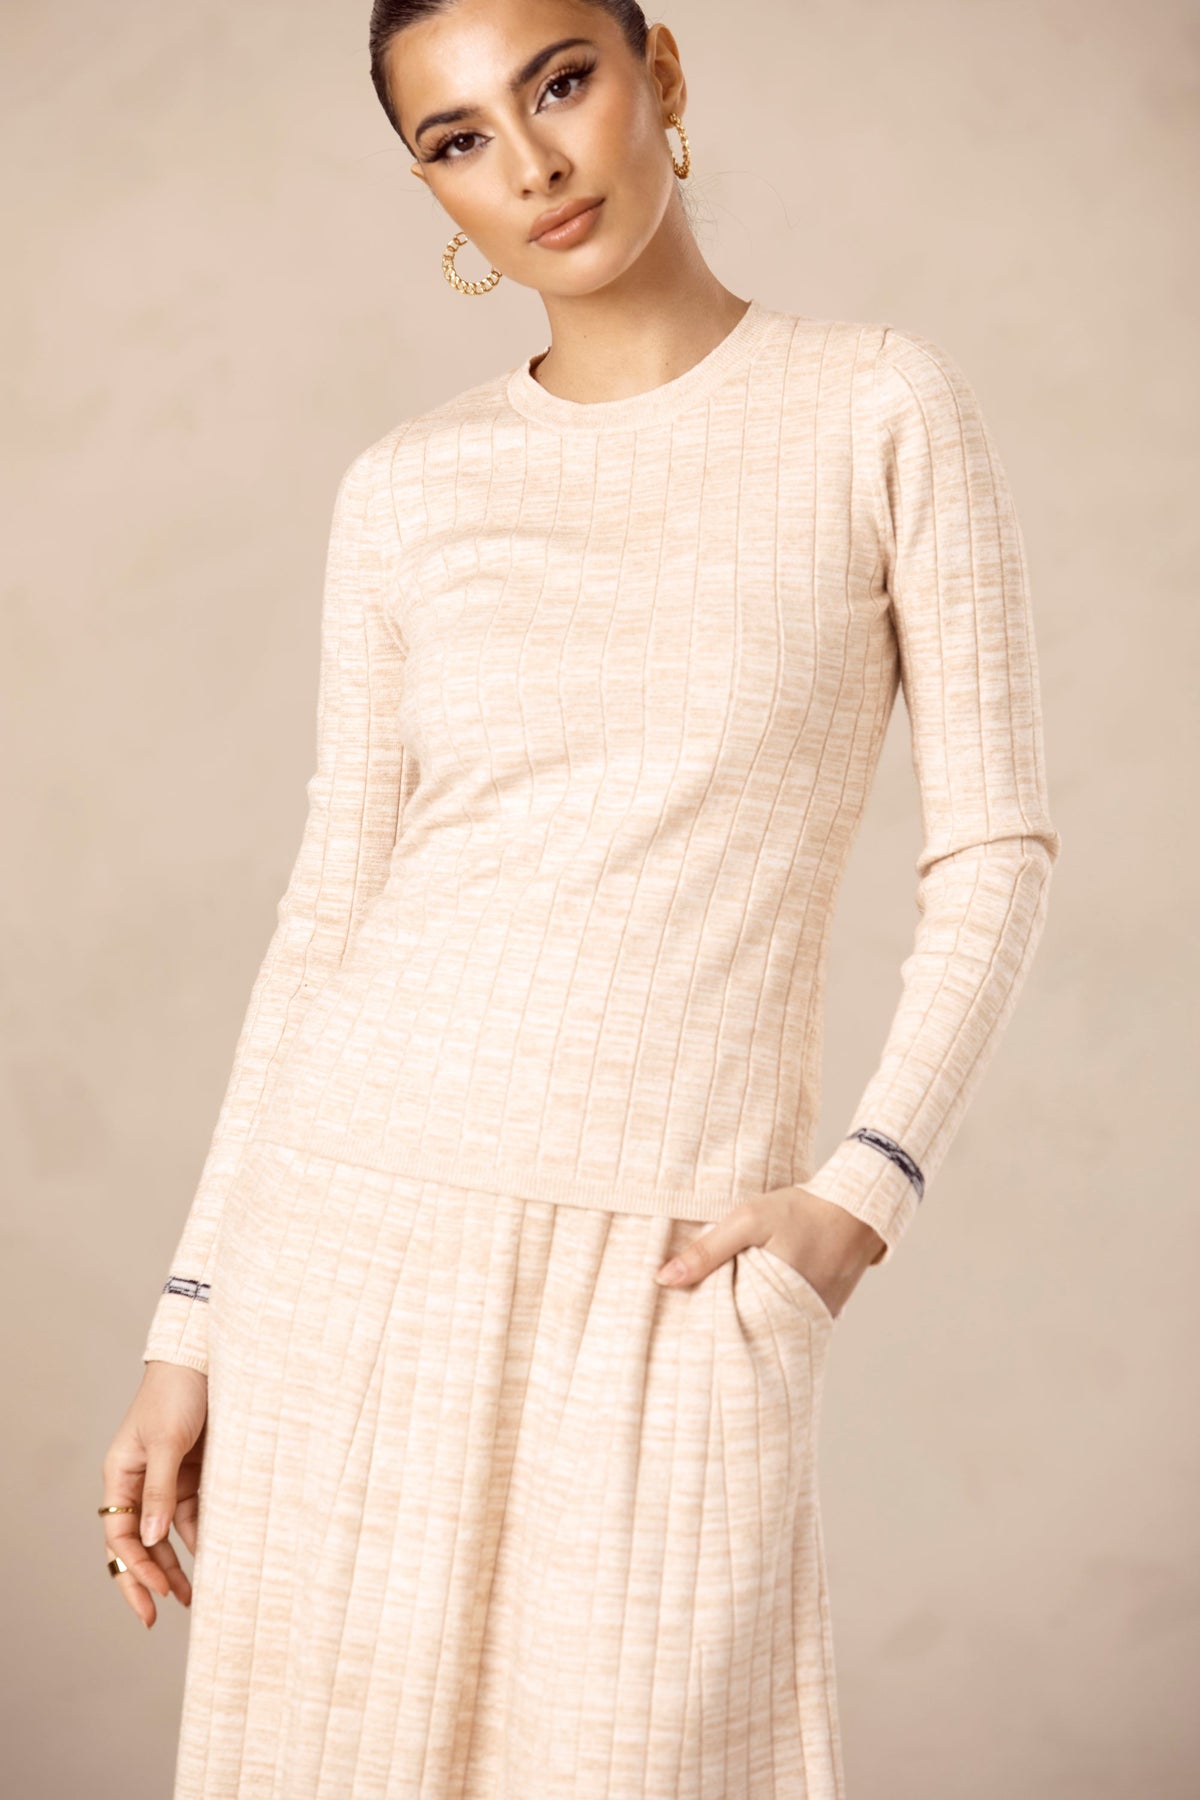 Oatmeal Knit Ribbed Top Veiled Collection 